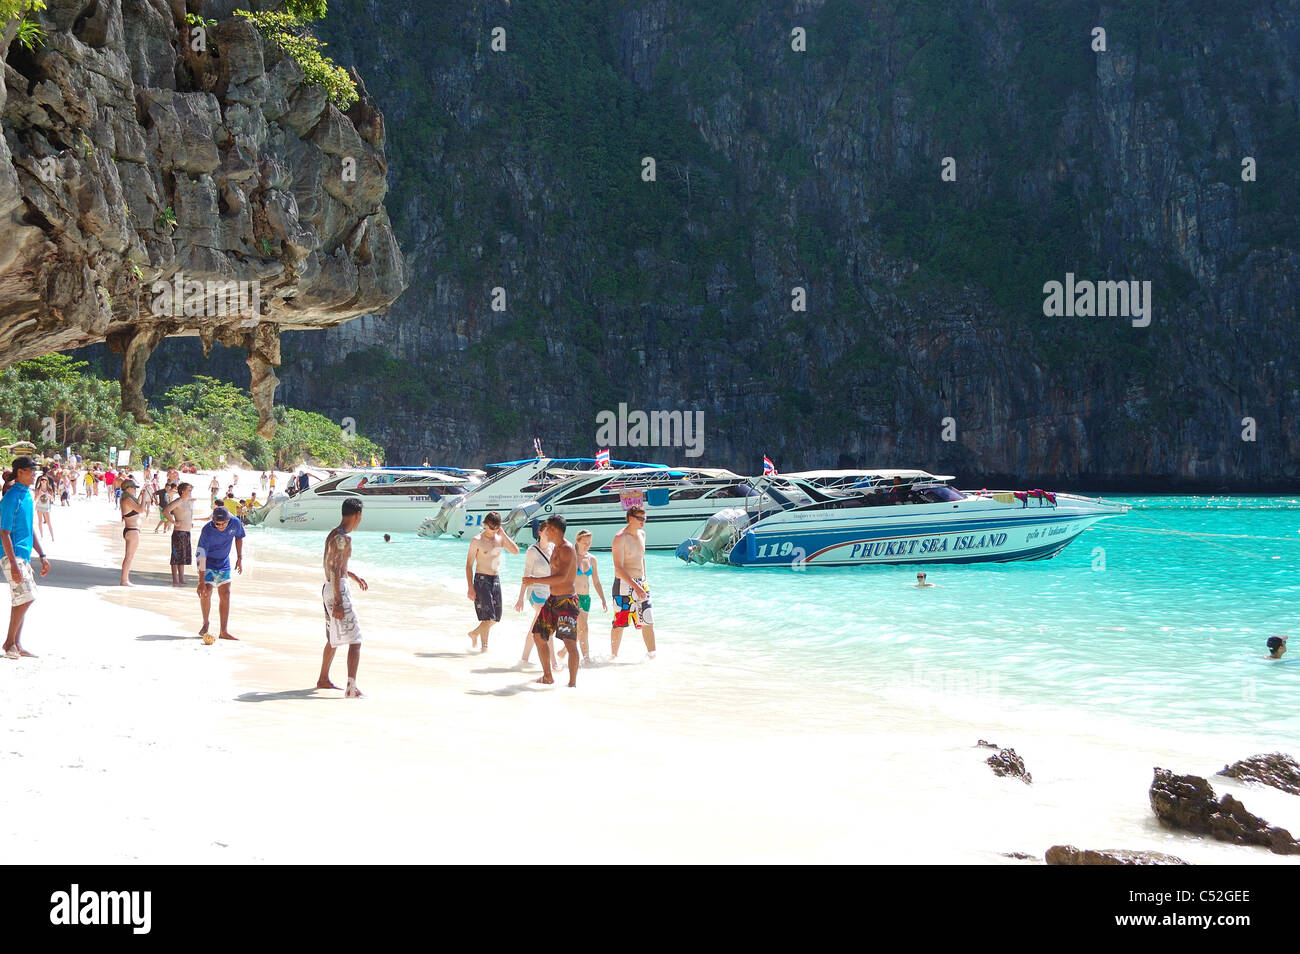 Beach with tourists and motor boats on turquoise water of Maya Bay lagoon, Koh Phi Phi island, Thailand Stock Photo